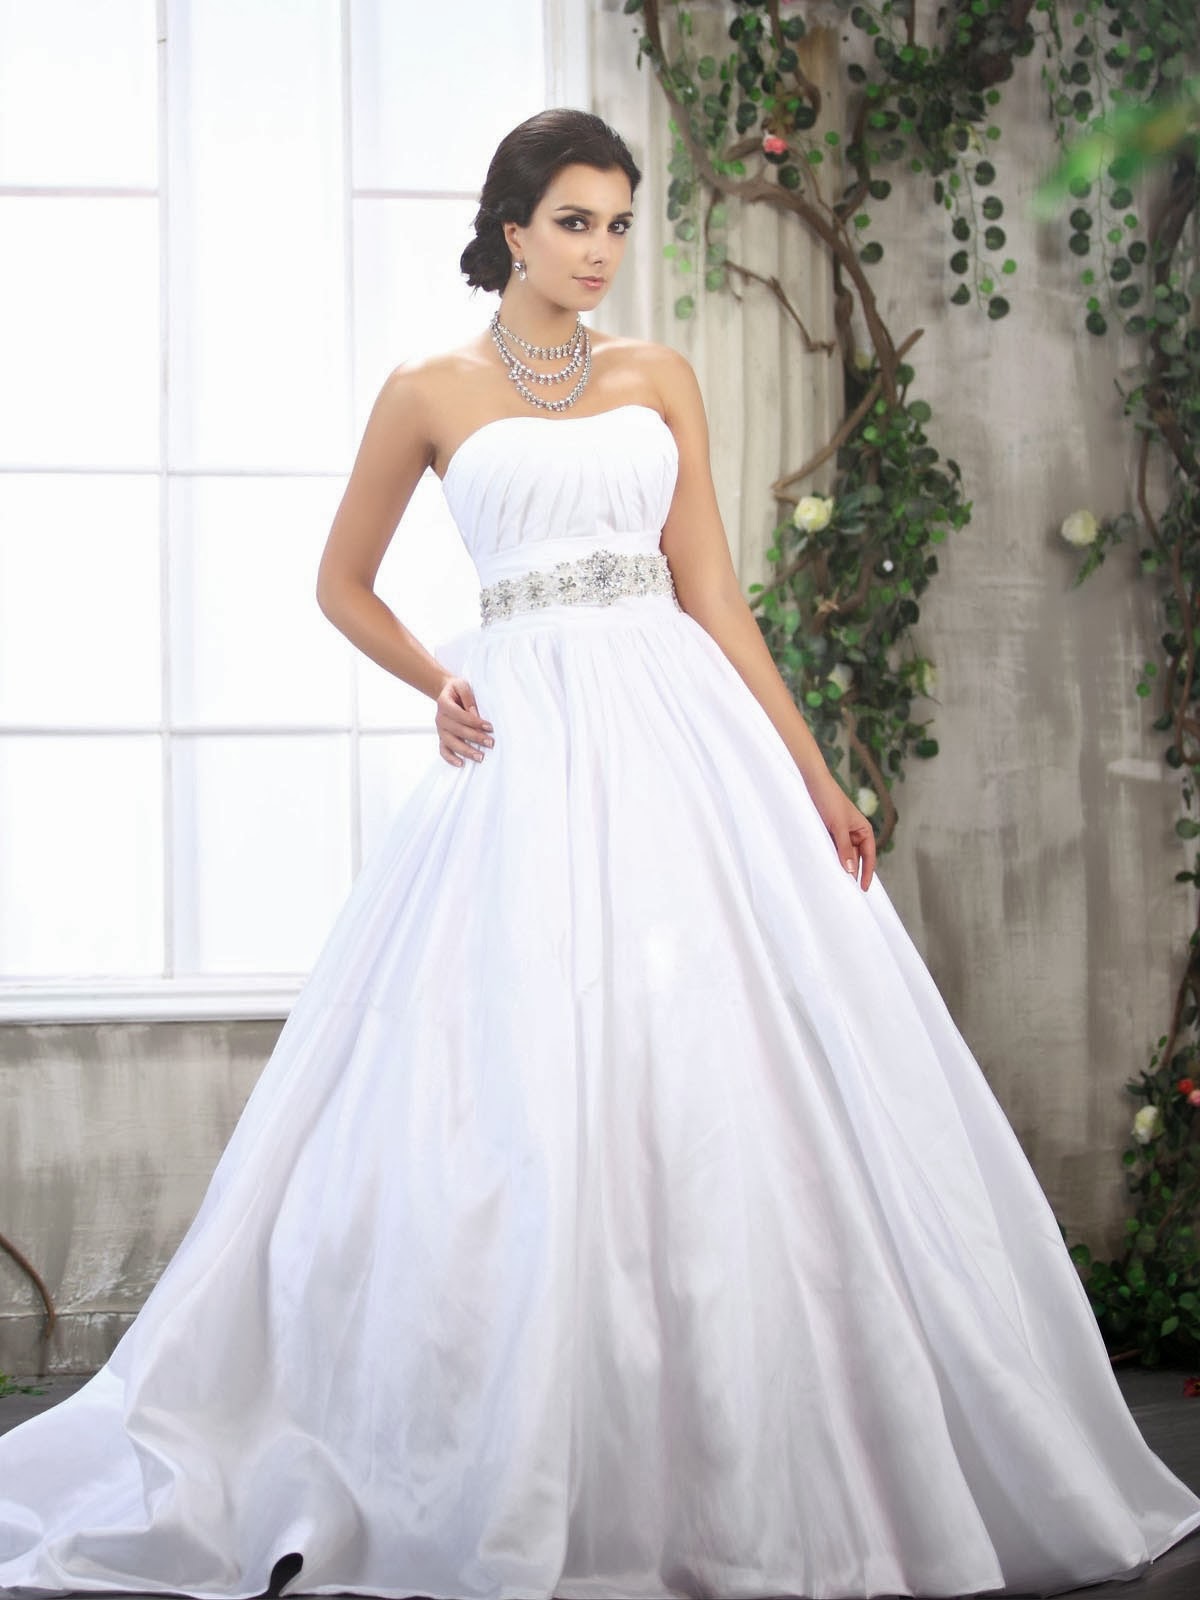 strapless wedding dresses ball gown lace precious deal princess ballgown wedding dress for ballroom party